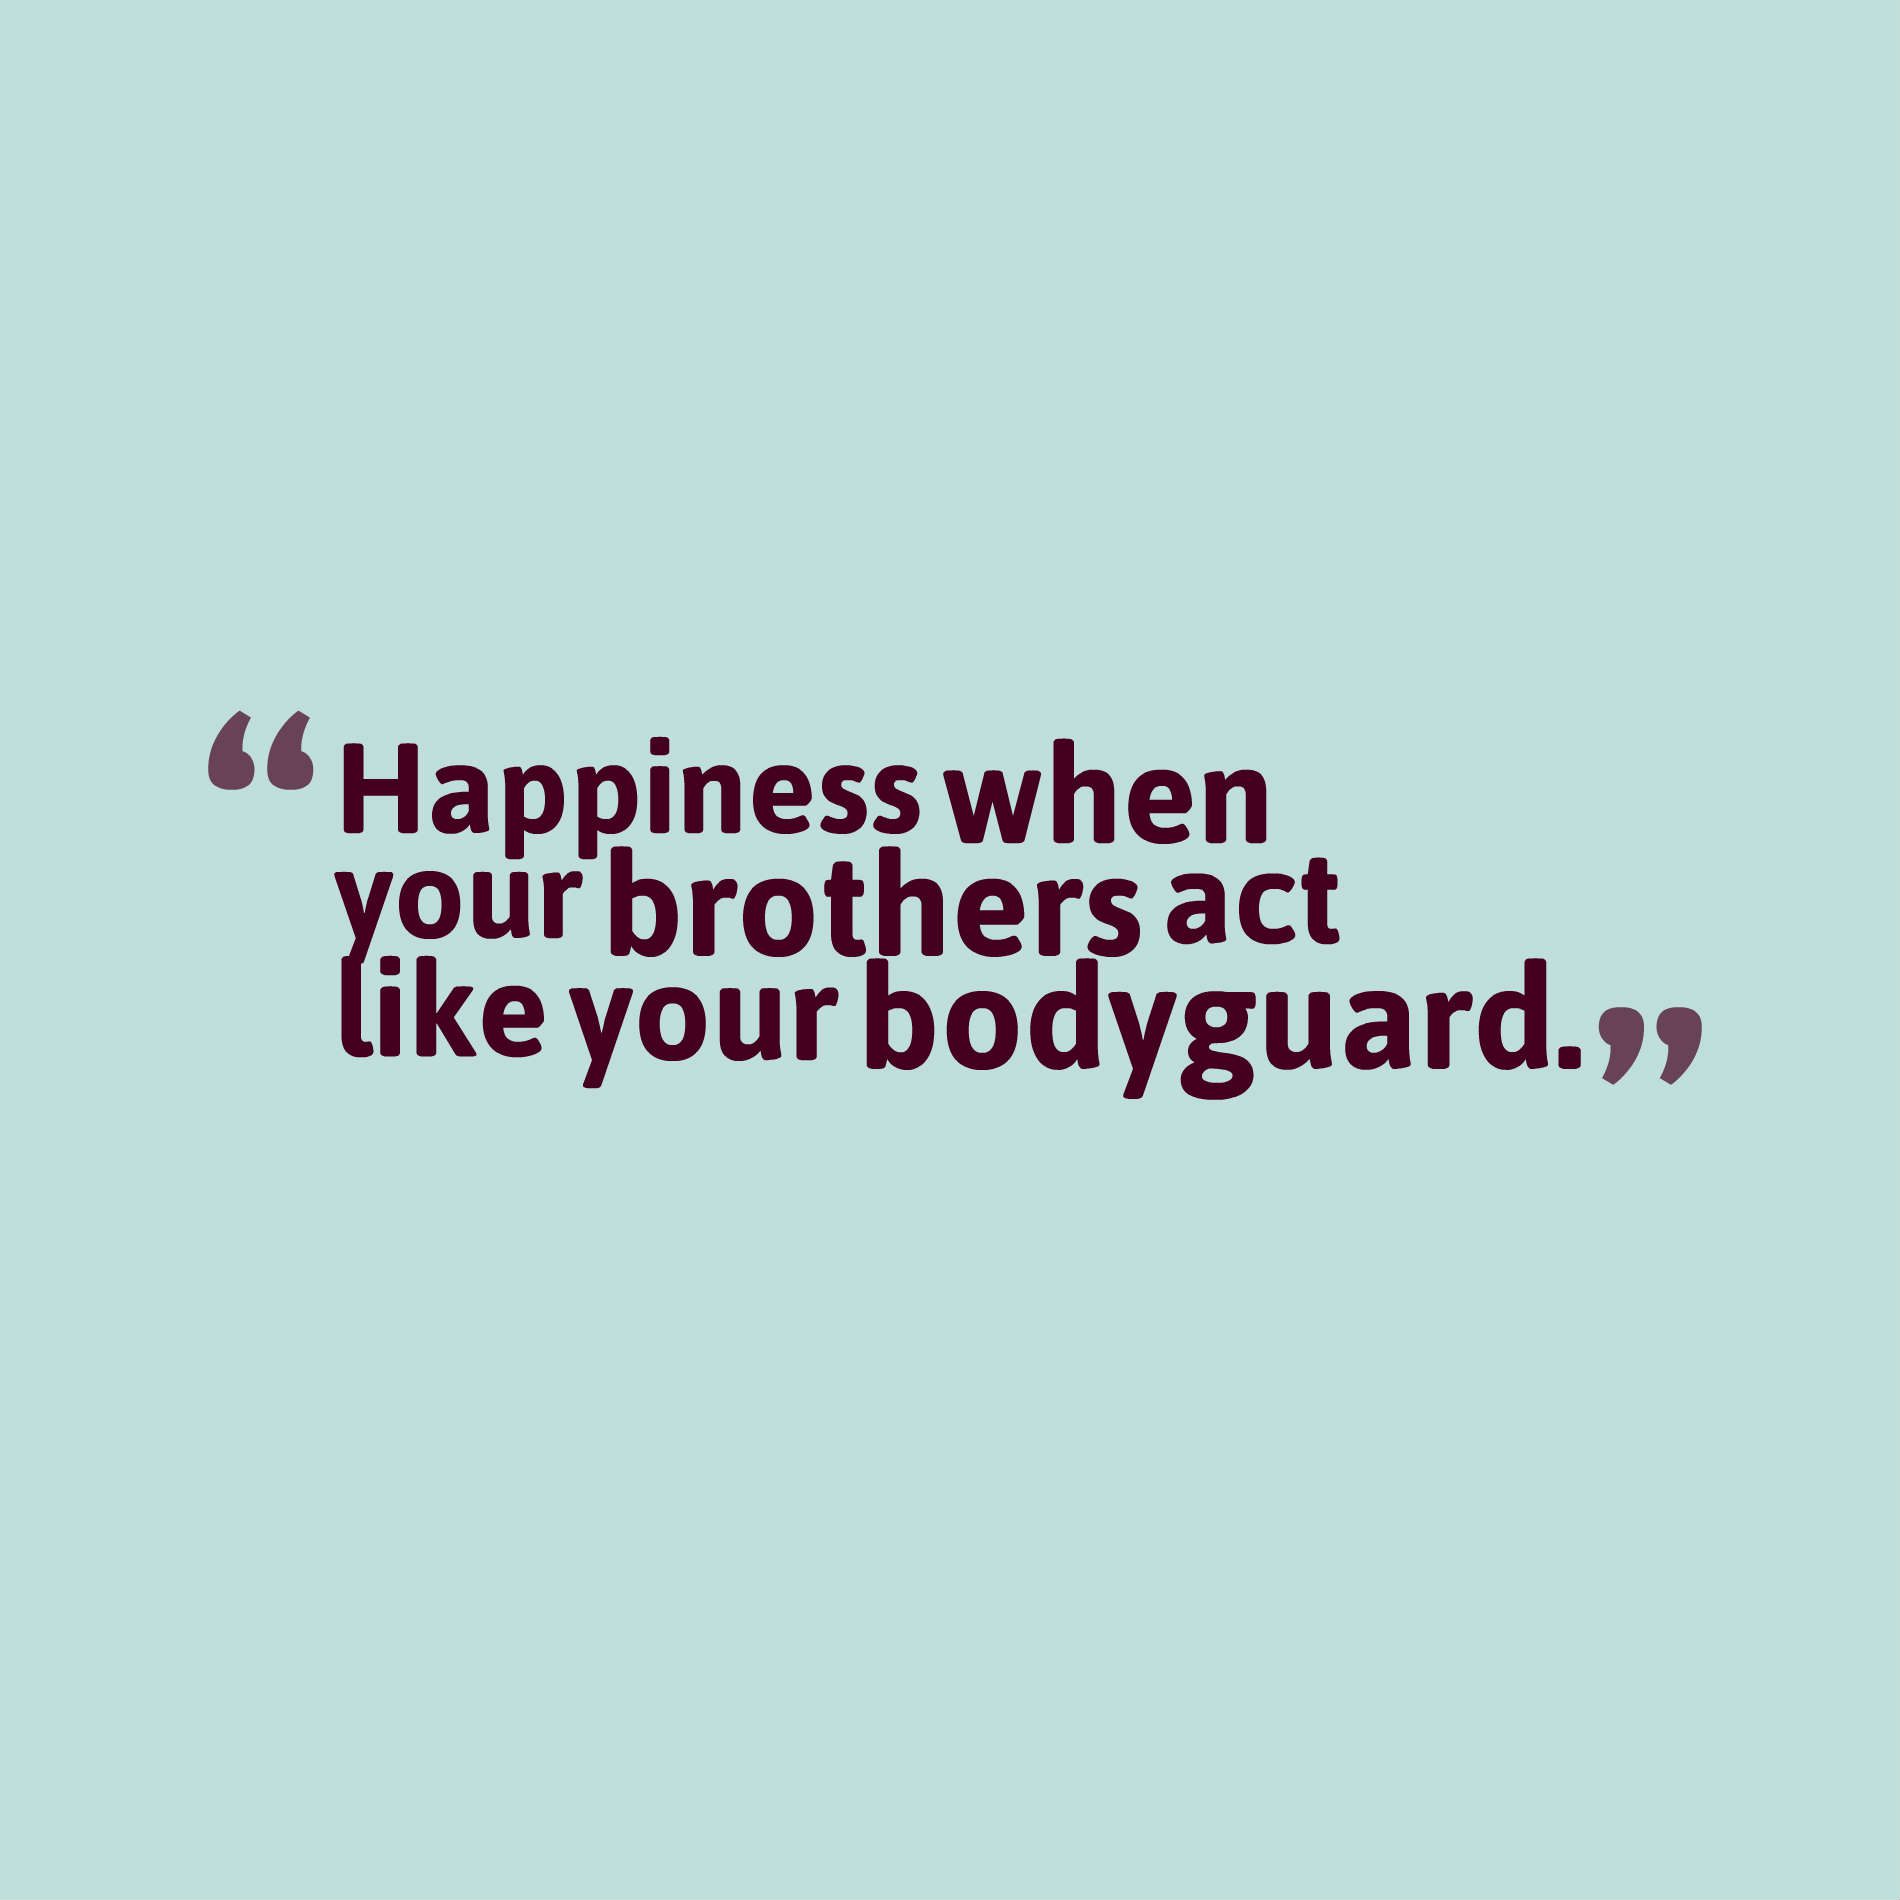 Happiness when your brothers act like your bodyguard.